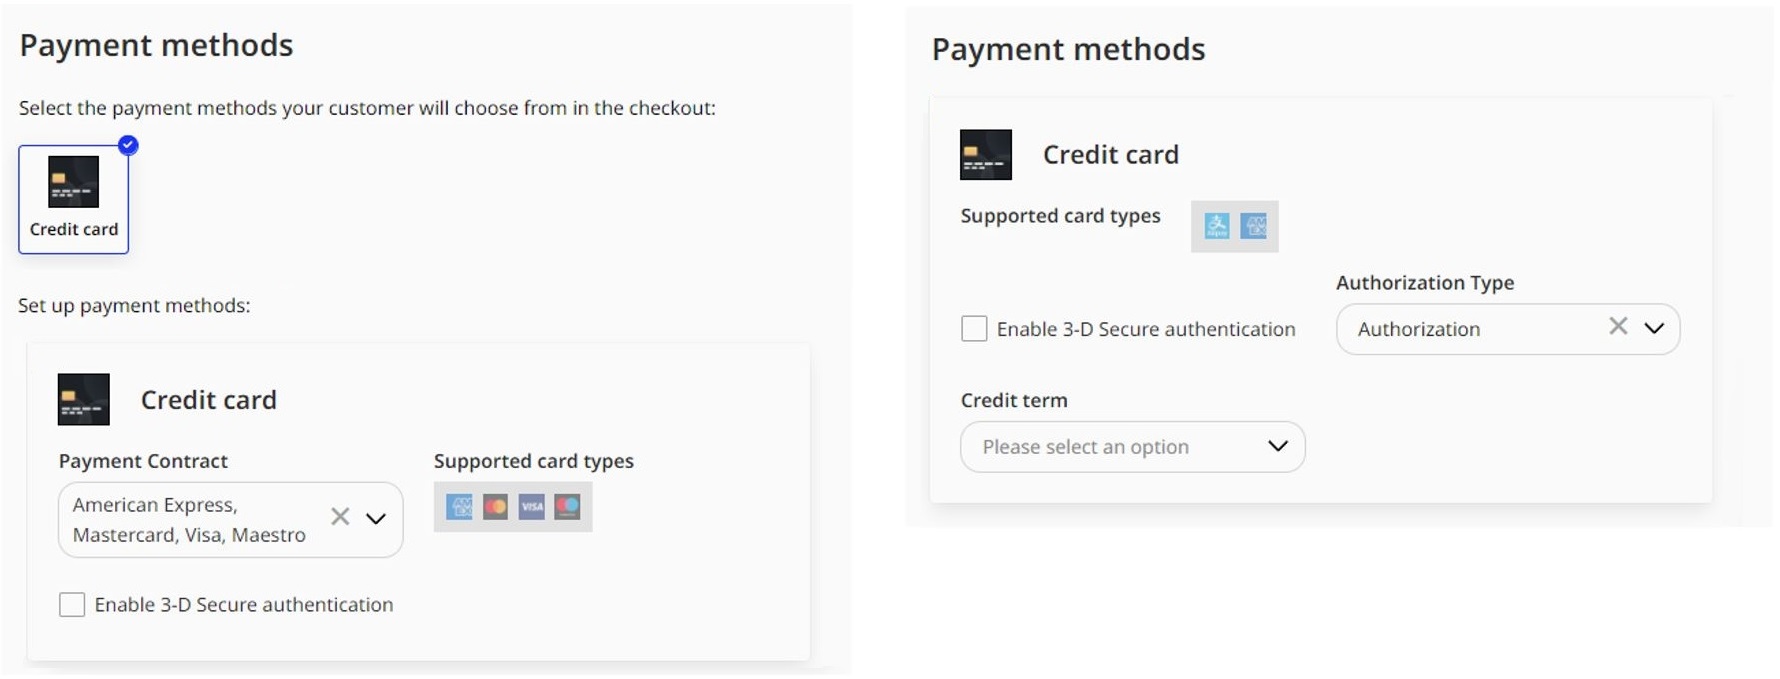 PBL Payment methods